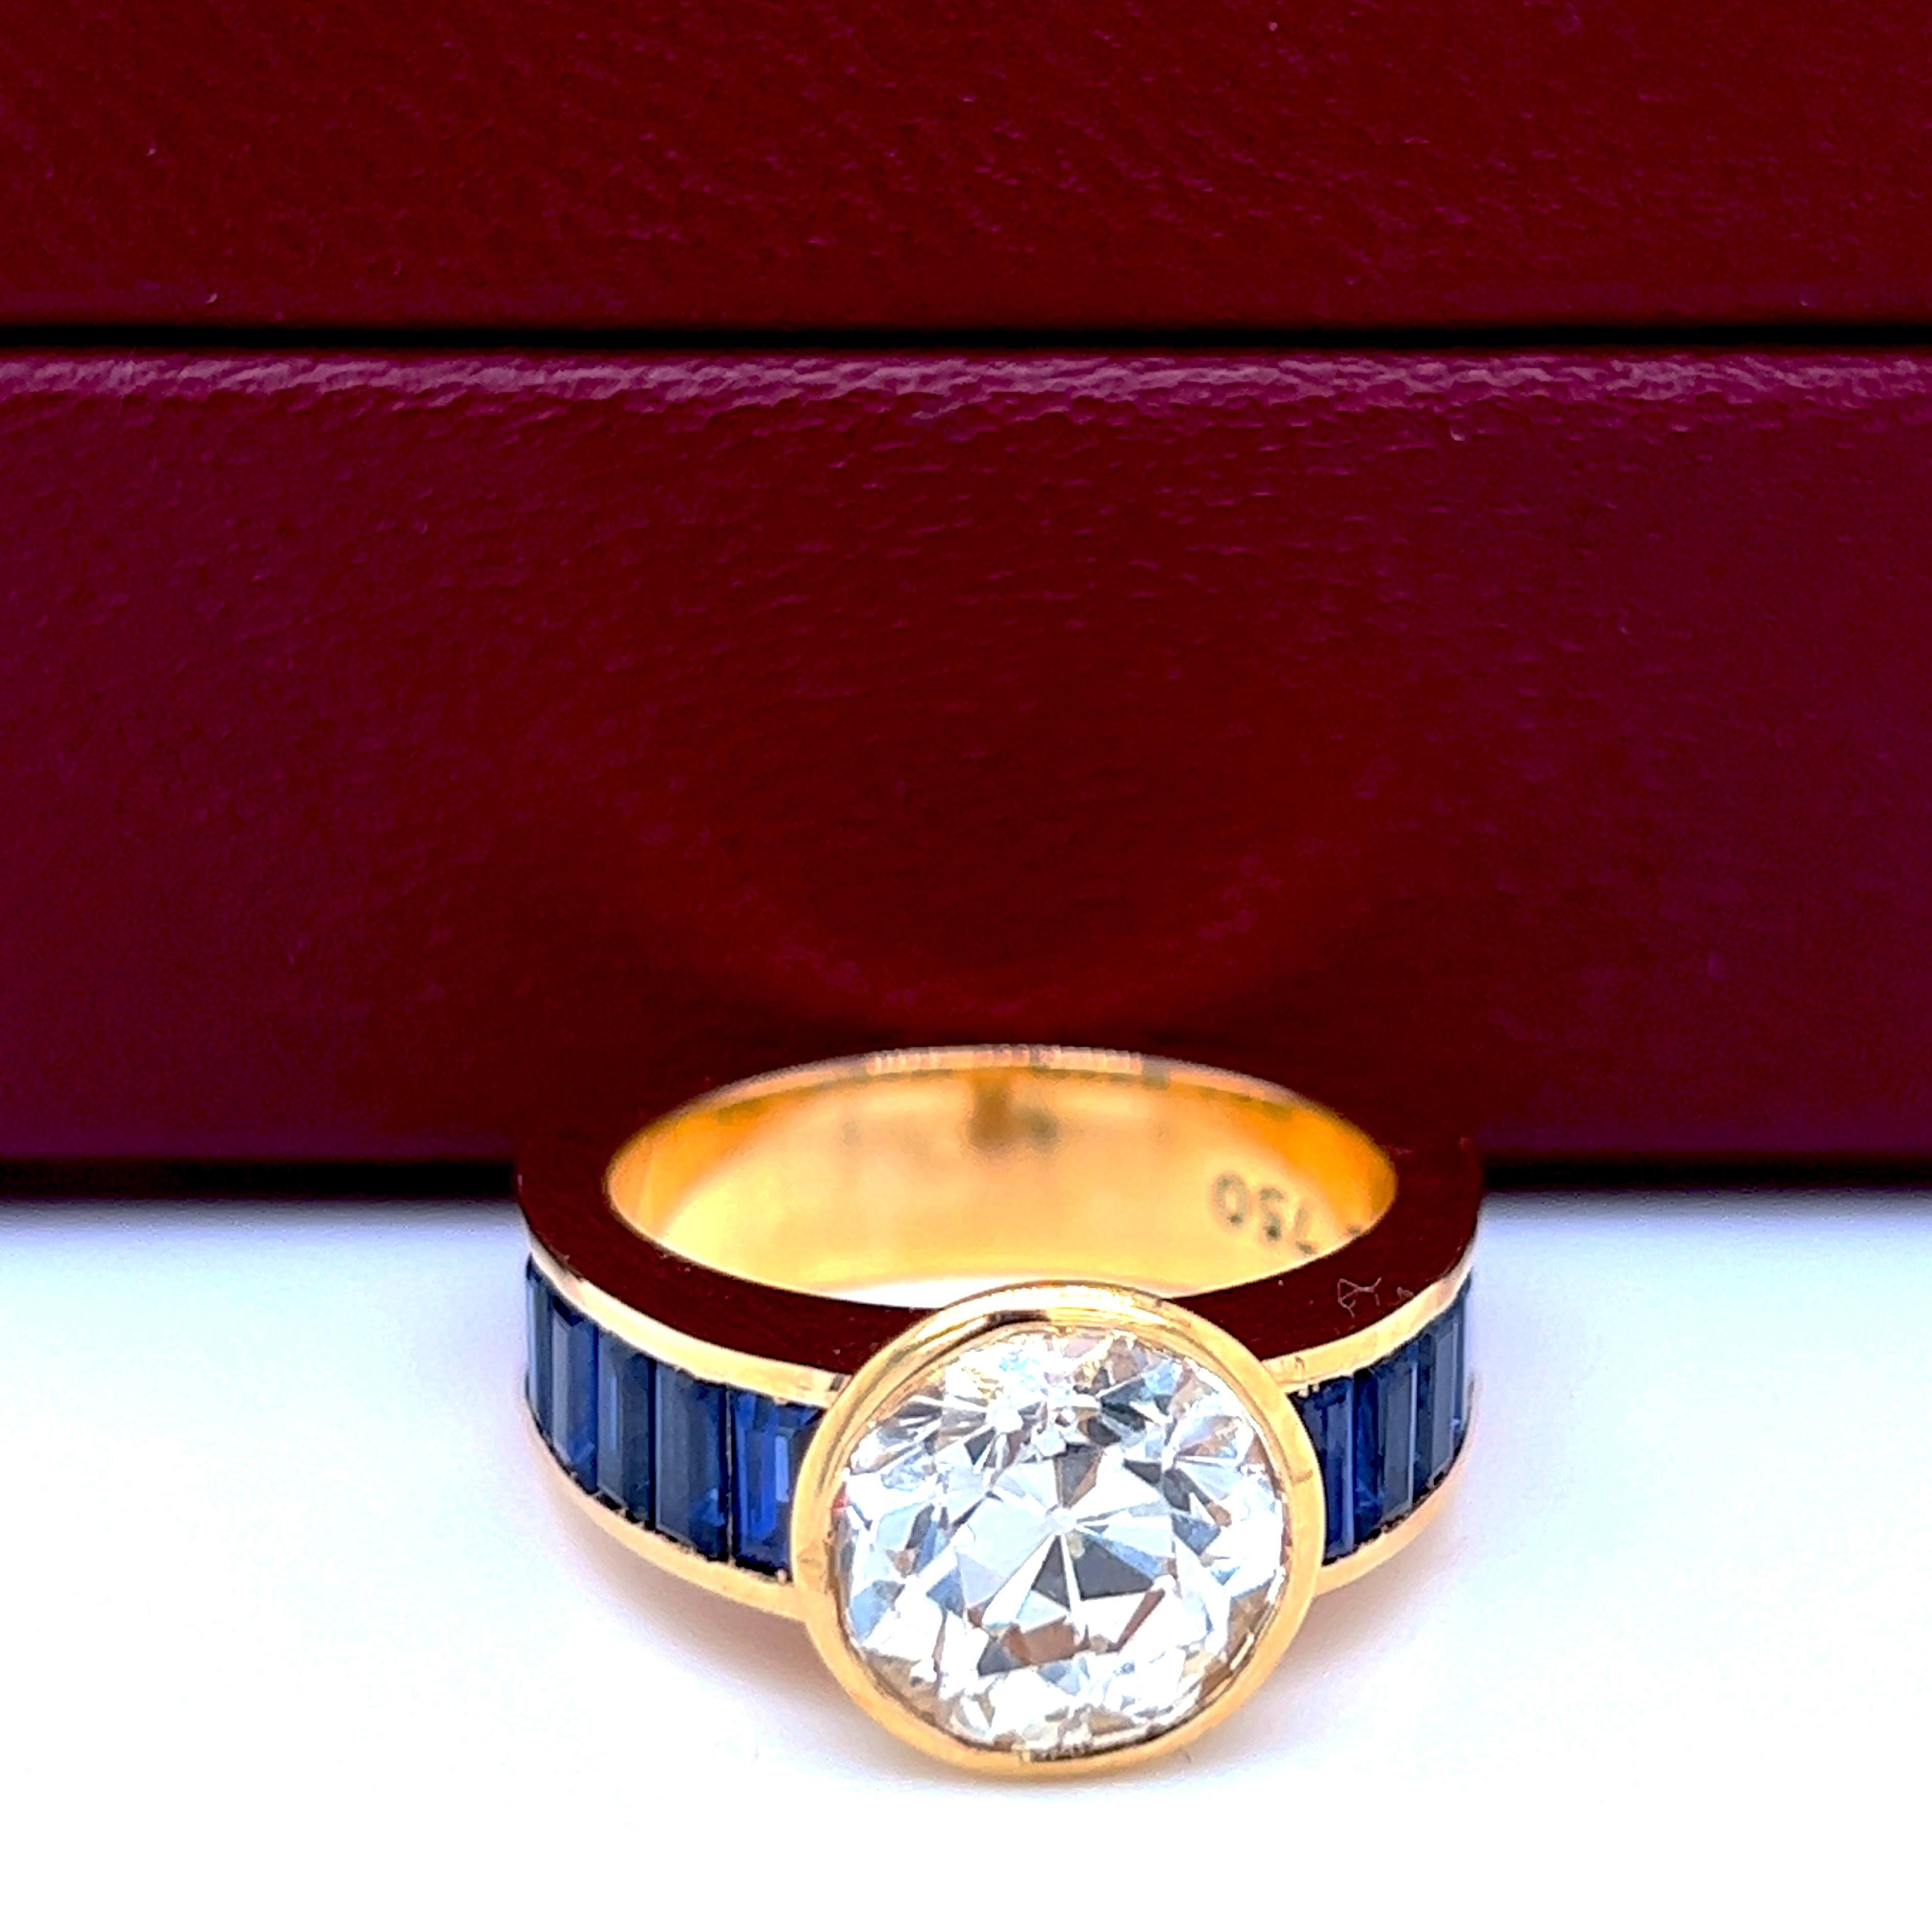 One-of-a-kind, Original 1980, Sumptuous, Unique yet Timeless Ring featuring a 3.29Kt Old European Cut White Diamond in a Blue Sapphire carefully calibrated Baguette Cut 18Kt Yellow Gold Setting: this piece while unsigned has a strong, bold design